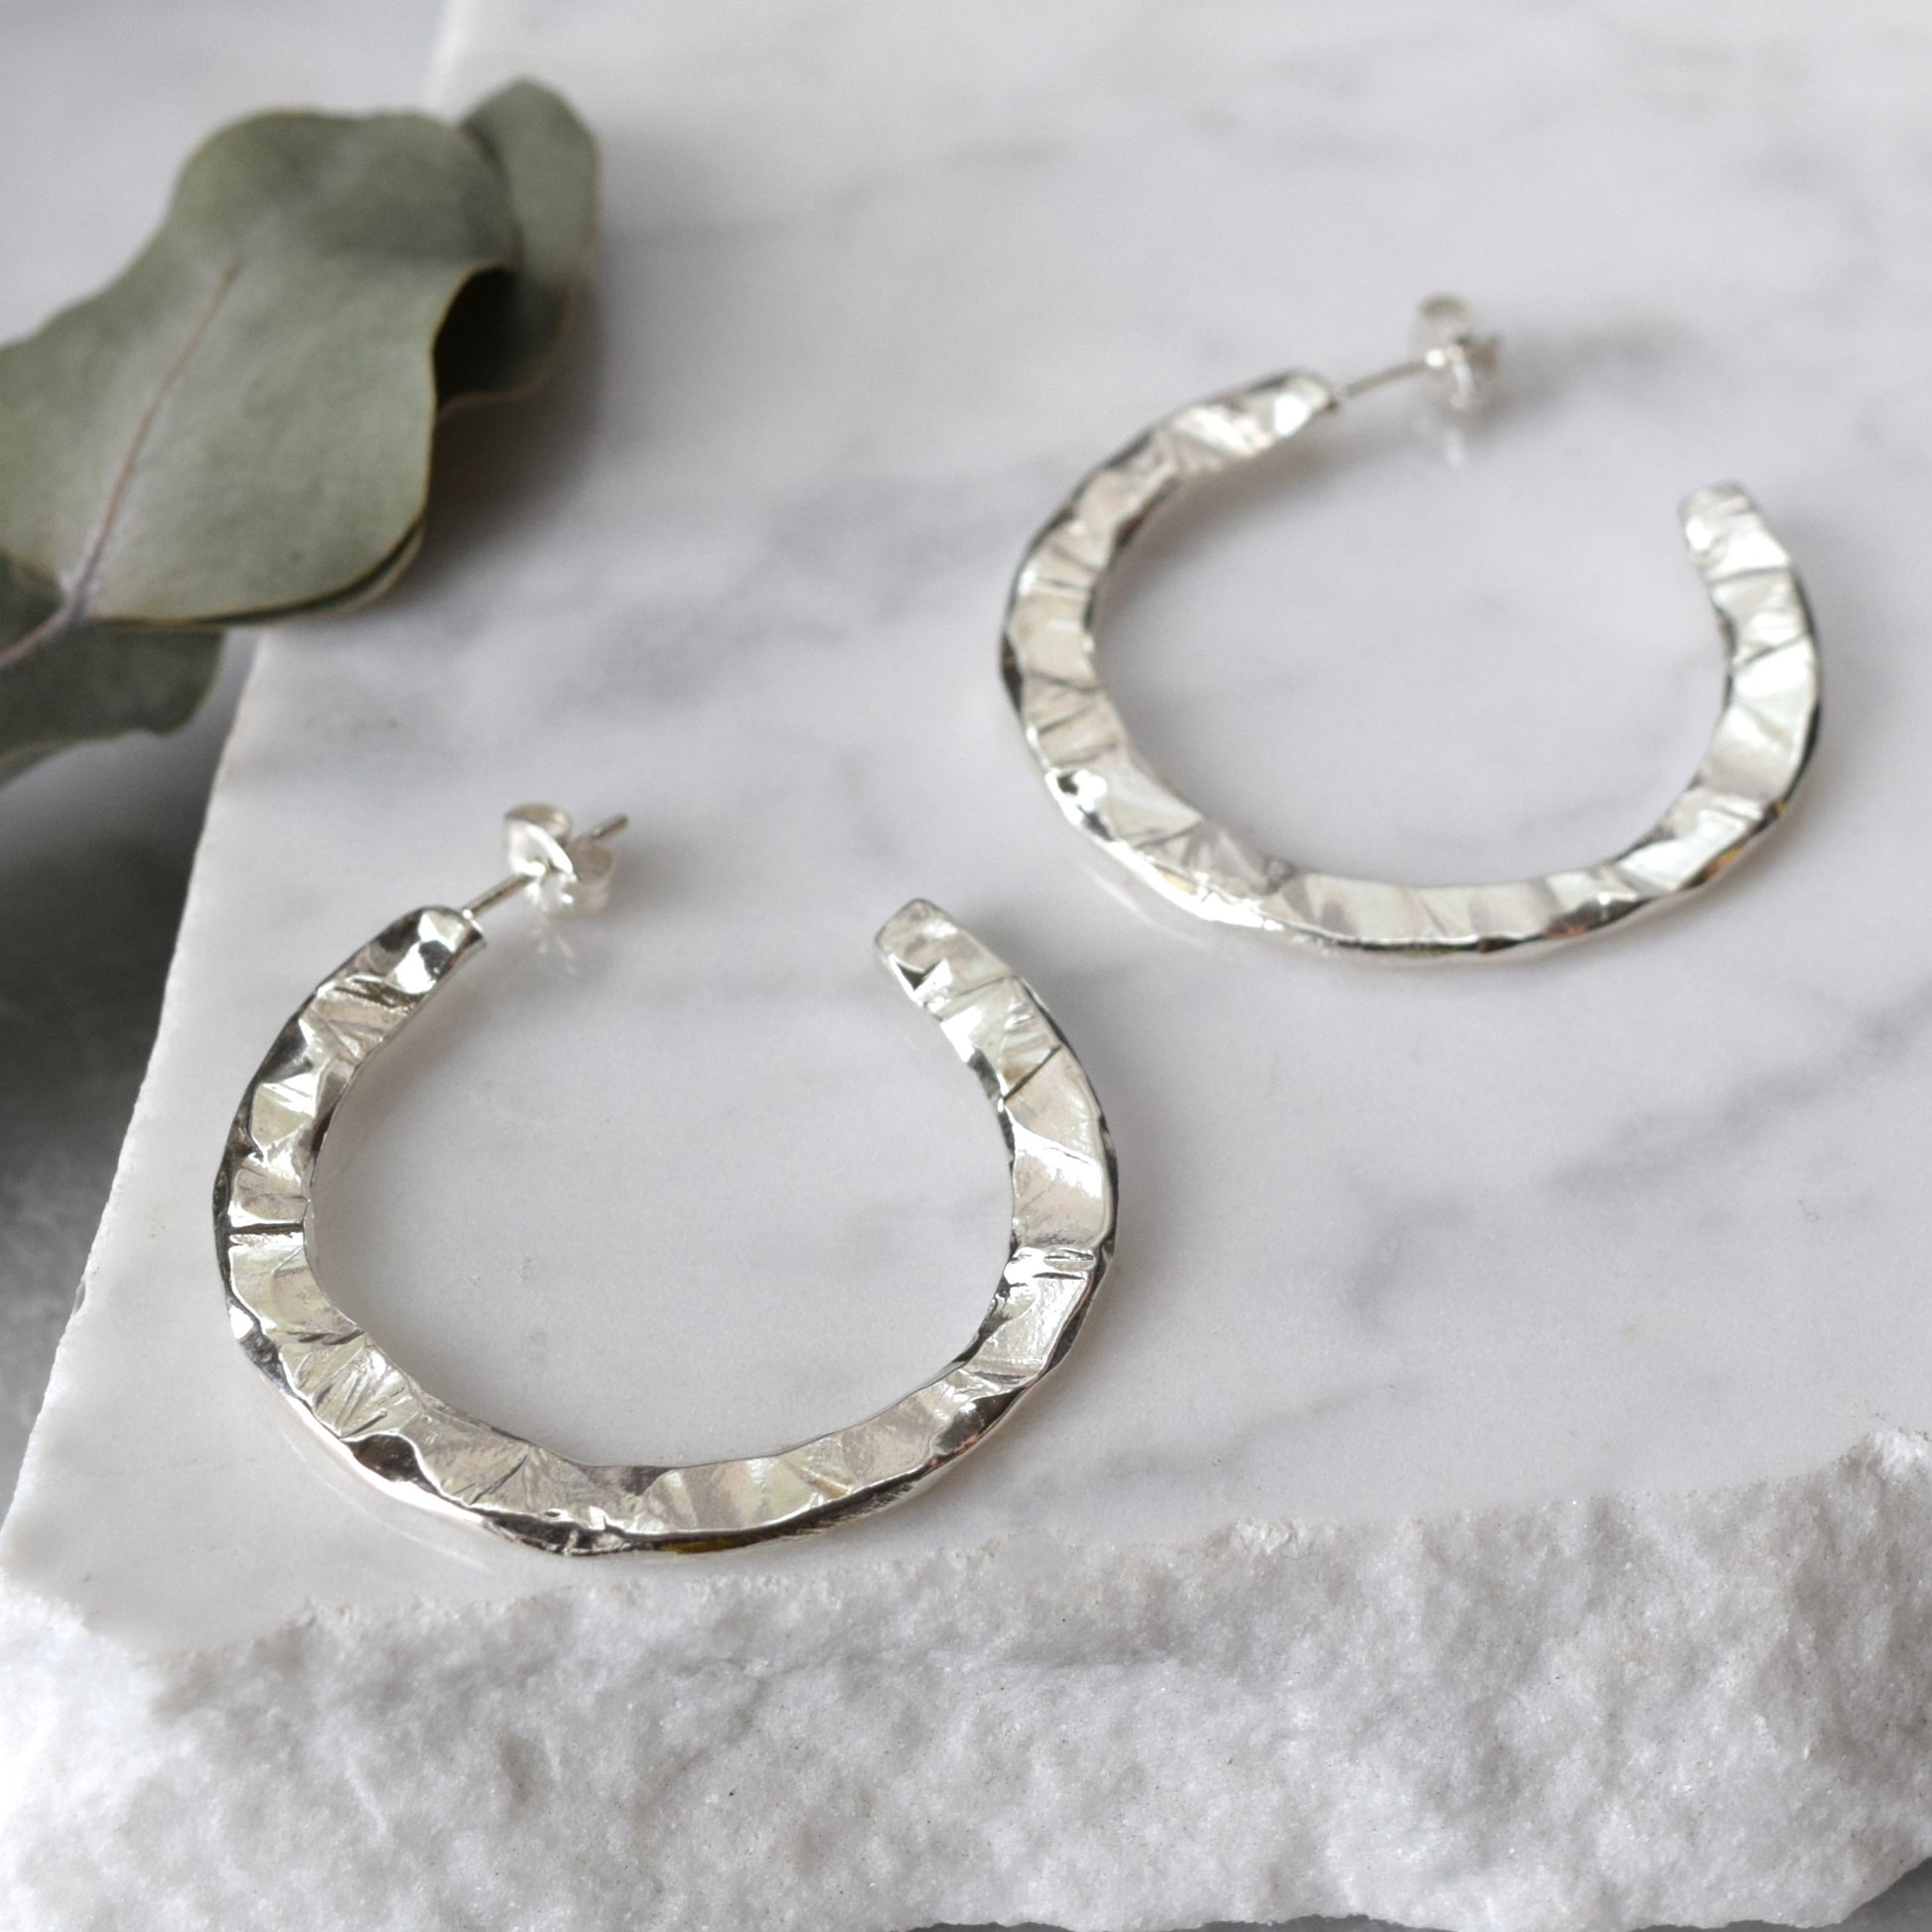 Product image of the Cosmo hoops earrings in silver showing the carved texture on the earrings